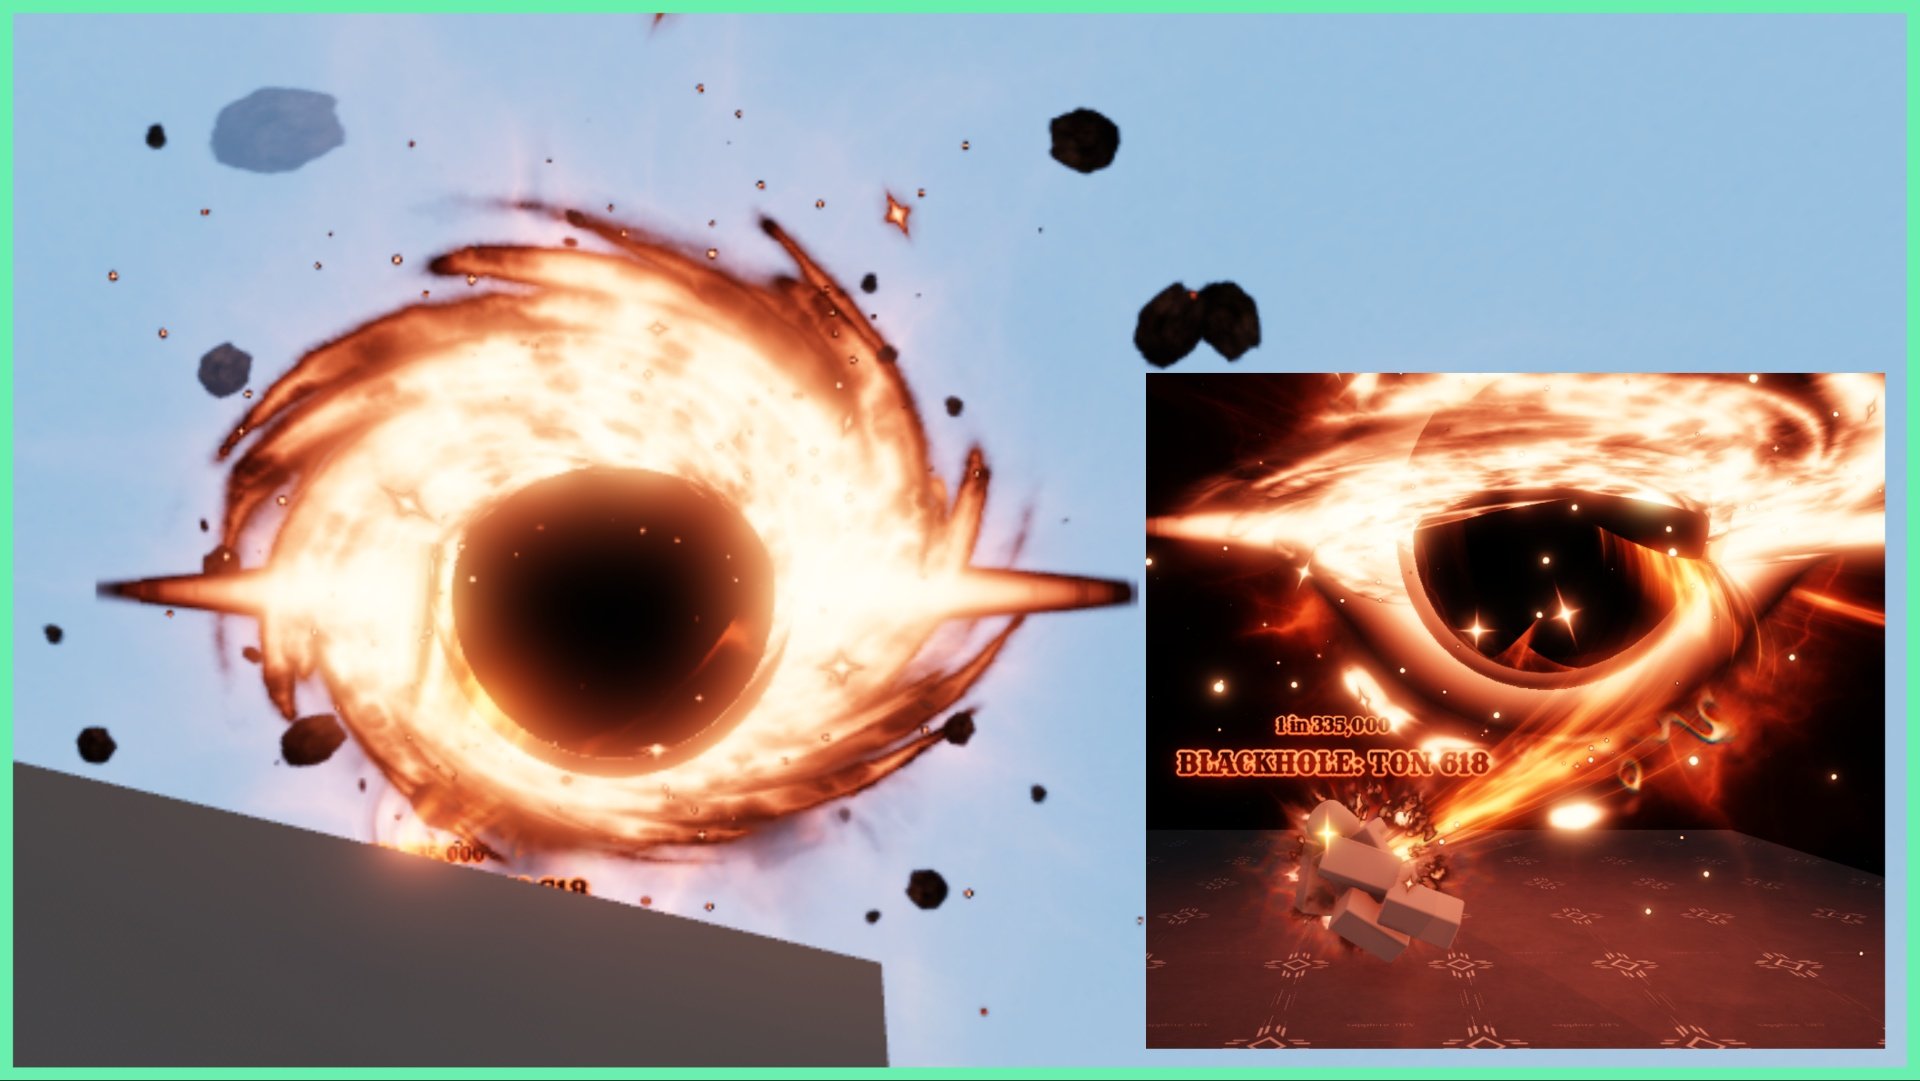 The image shows a bottom up view of the Blackhole aura within Hades RNG during daytime with a grey-blue sky. The aura is spitting debris in its orbit and is a black orb with a swirling hot disc. Off to the side is a PNG addition of the black hole aura on full display including a dummy to test how the aura looks on an avatar